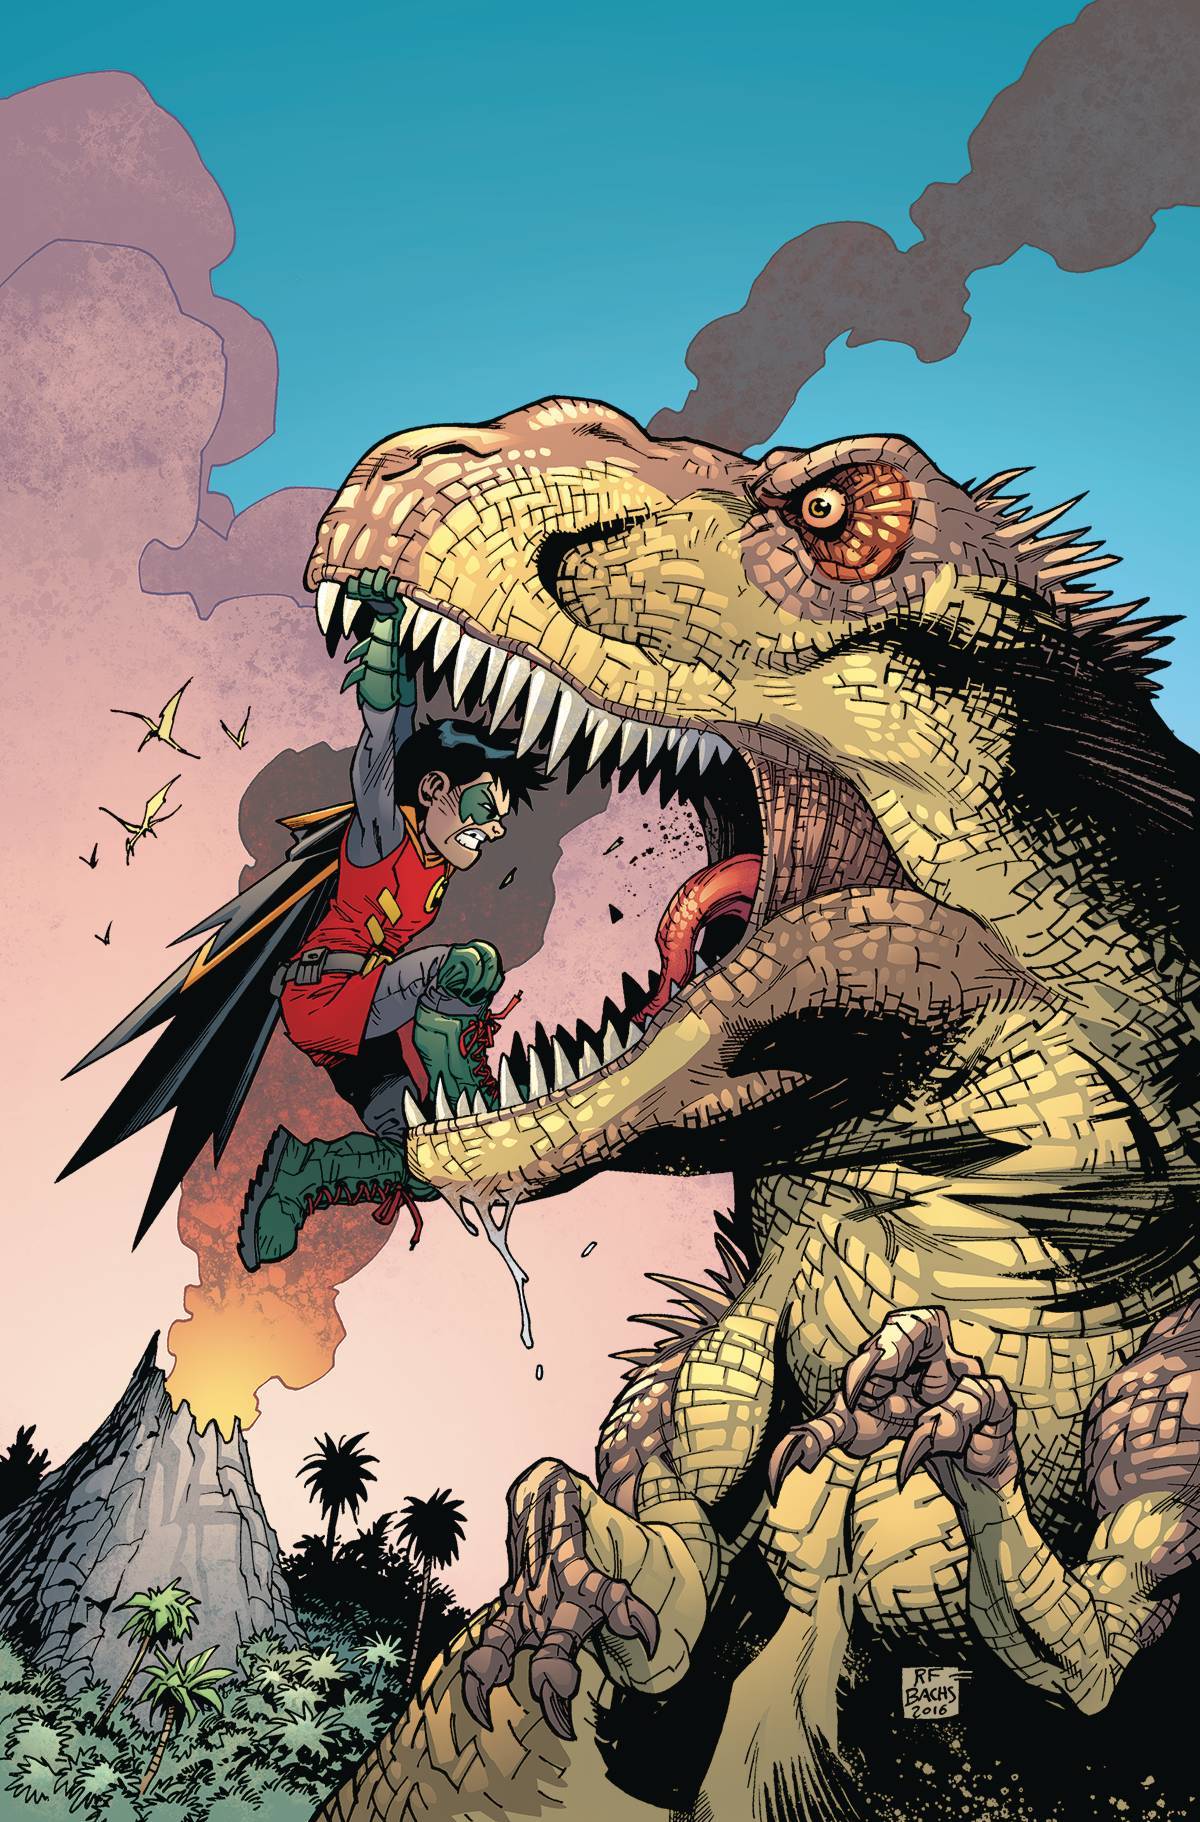 Fistfights, dinosaurs, collateral damage - every family has its little ups and downs, right? Damian, Talia al Ghul and Bruce Wayne team up for Robin: Son of Batman #12, out this week at Curious Comics!